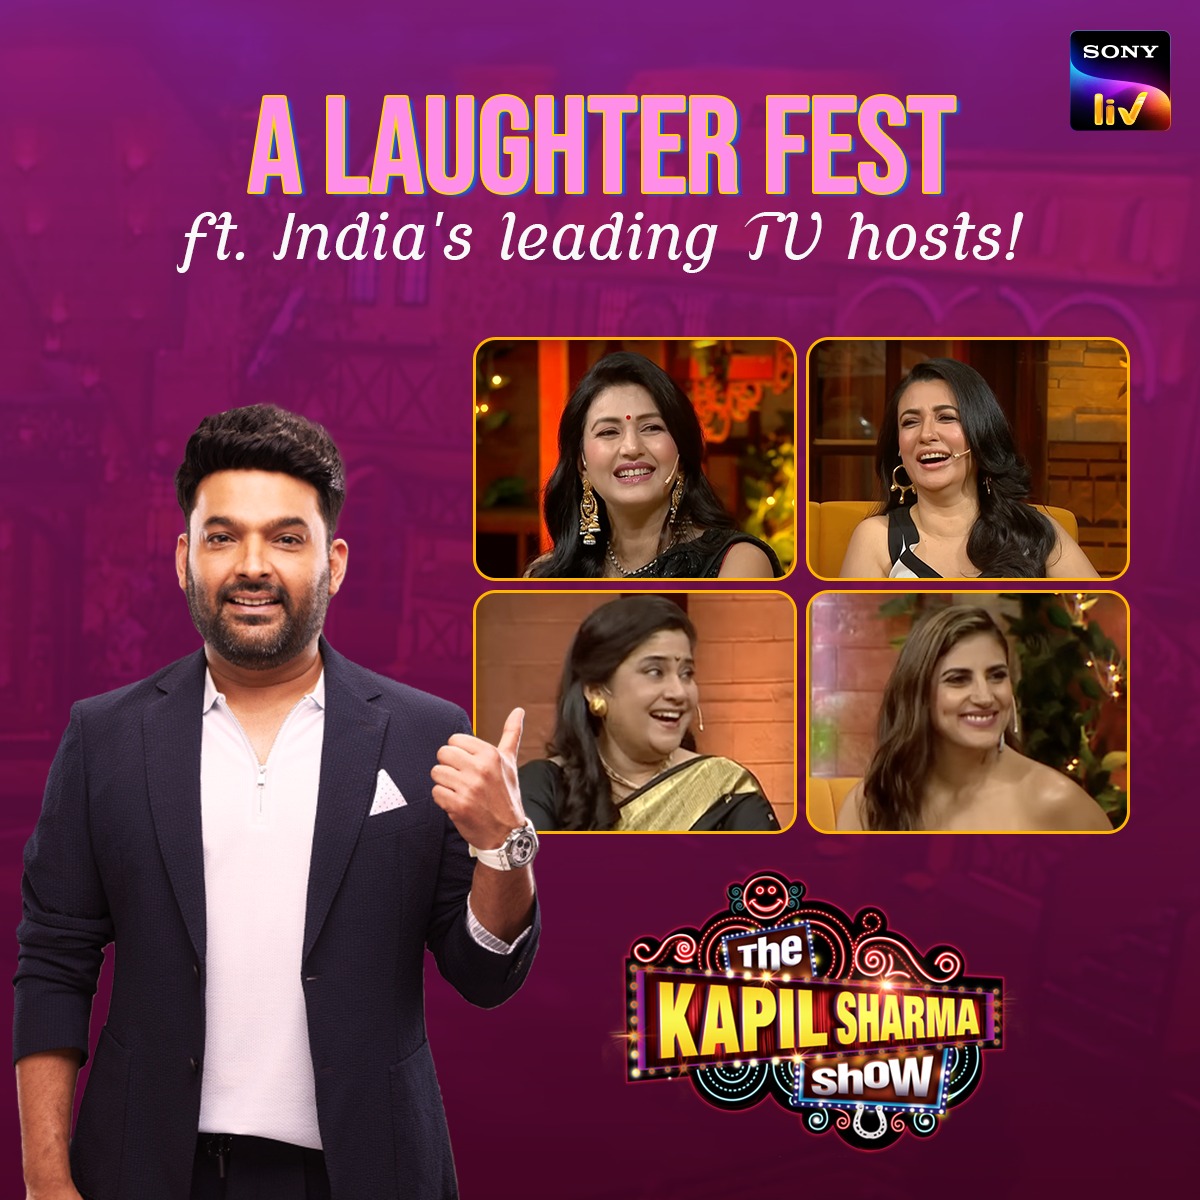 Join Kapil and his hilarious crew as they bring the house down with renowned actresses & TV presenters @minimathur, @renukash , @deebbhatnagar & others in tow! Watch the new episode of #TheKapilSharmaShow, anytime, anywhere on #SonyLIV.